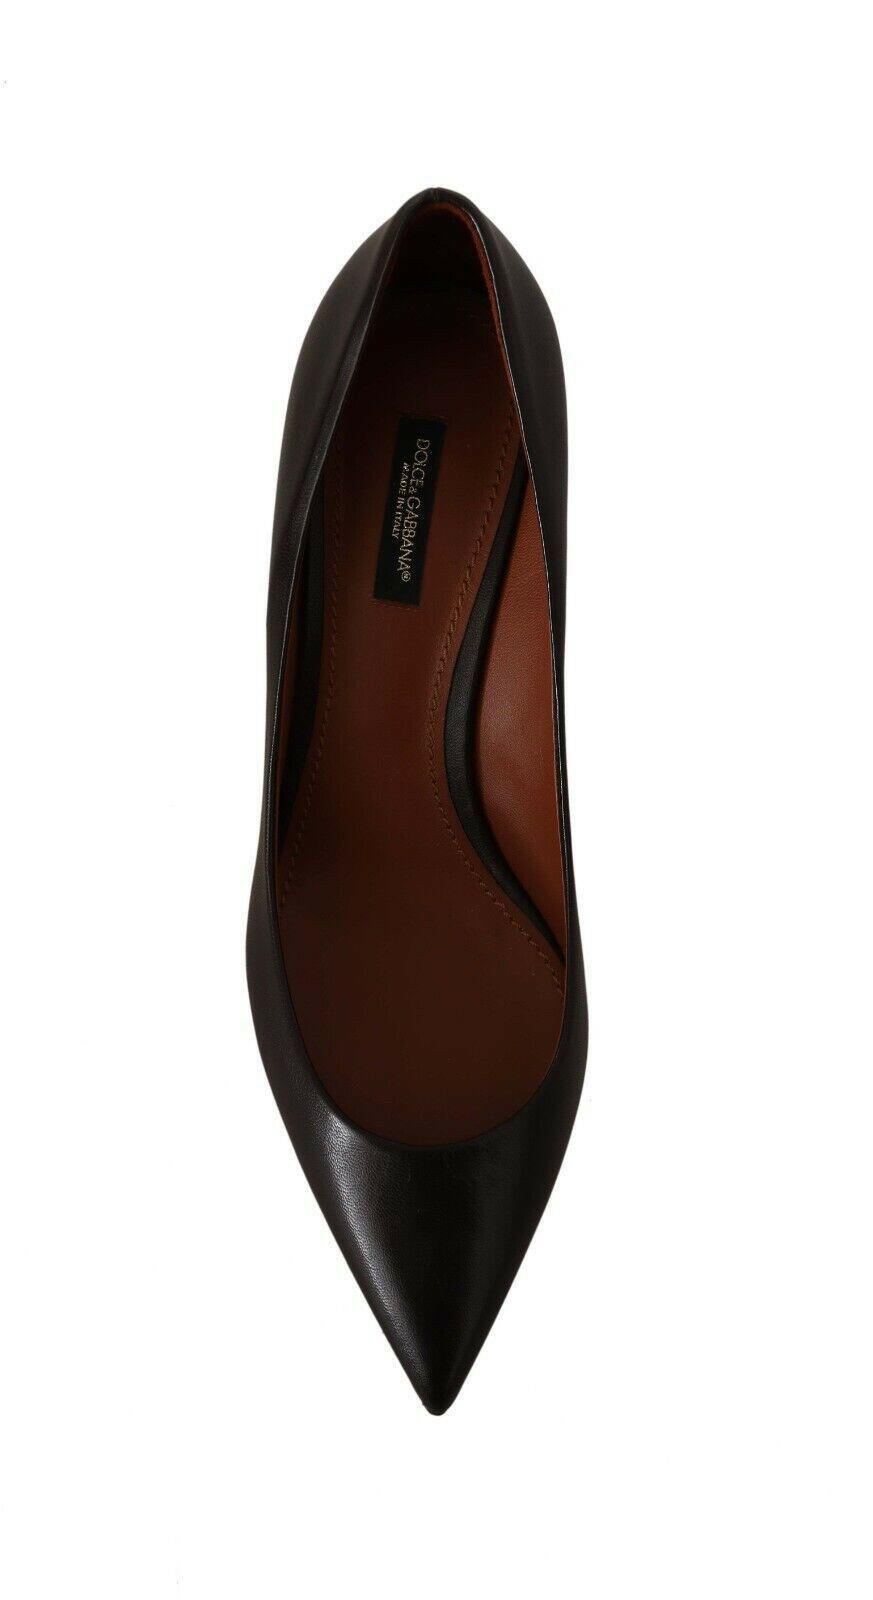 Dolce & Gabbana Brown Leather Kitten Mid Heels Pumps Shoes - GENUINE AUTHENTIC BRAND LLC  